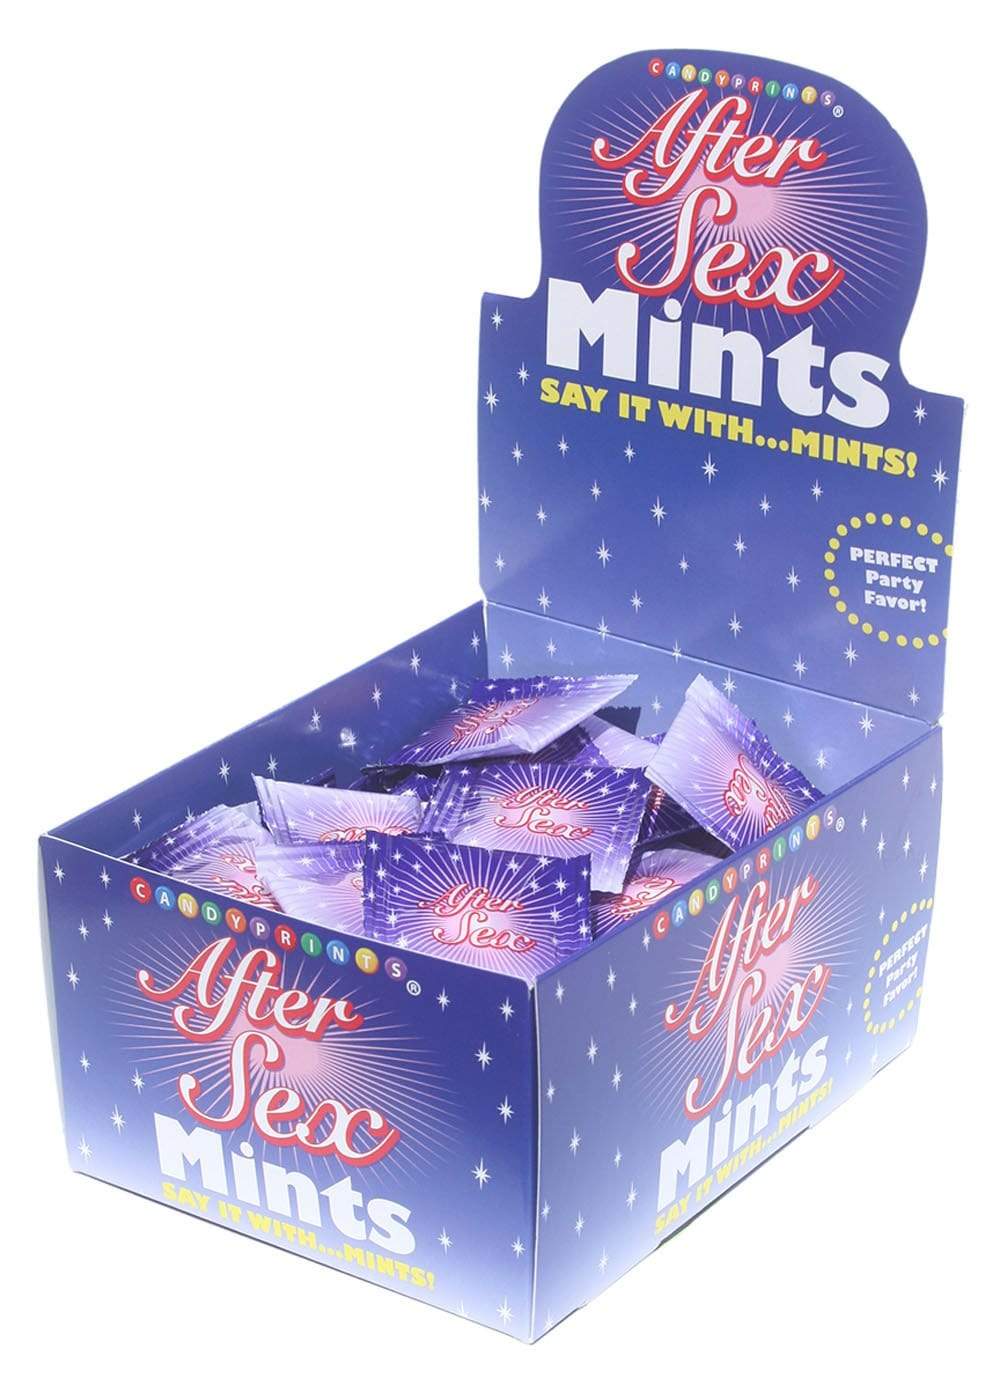 amazing after sex mints candy display 3 1g 100 bags